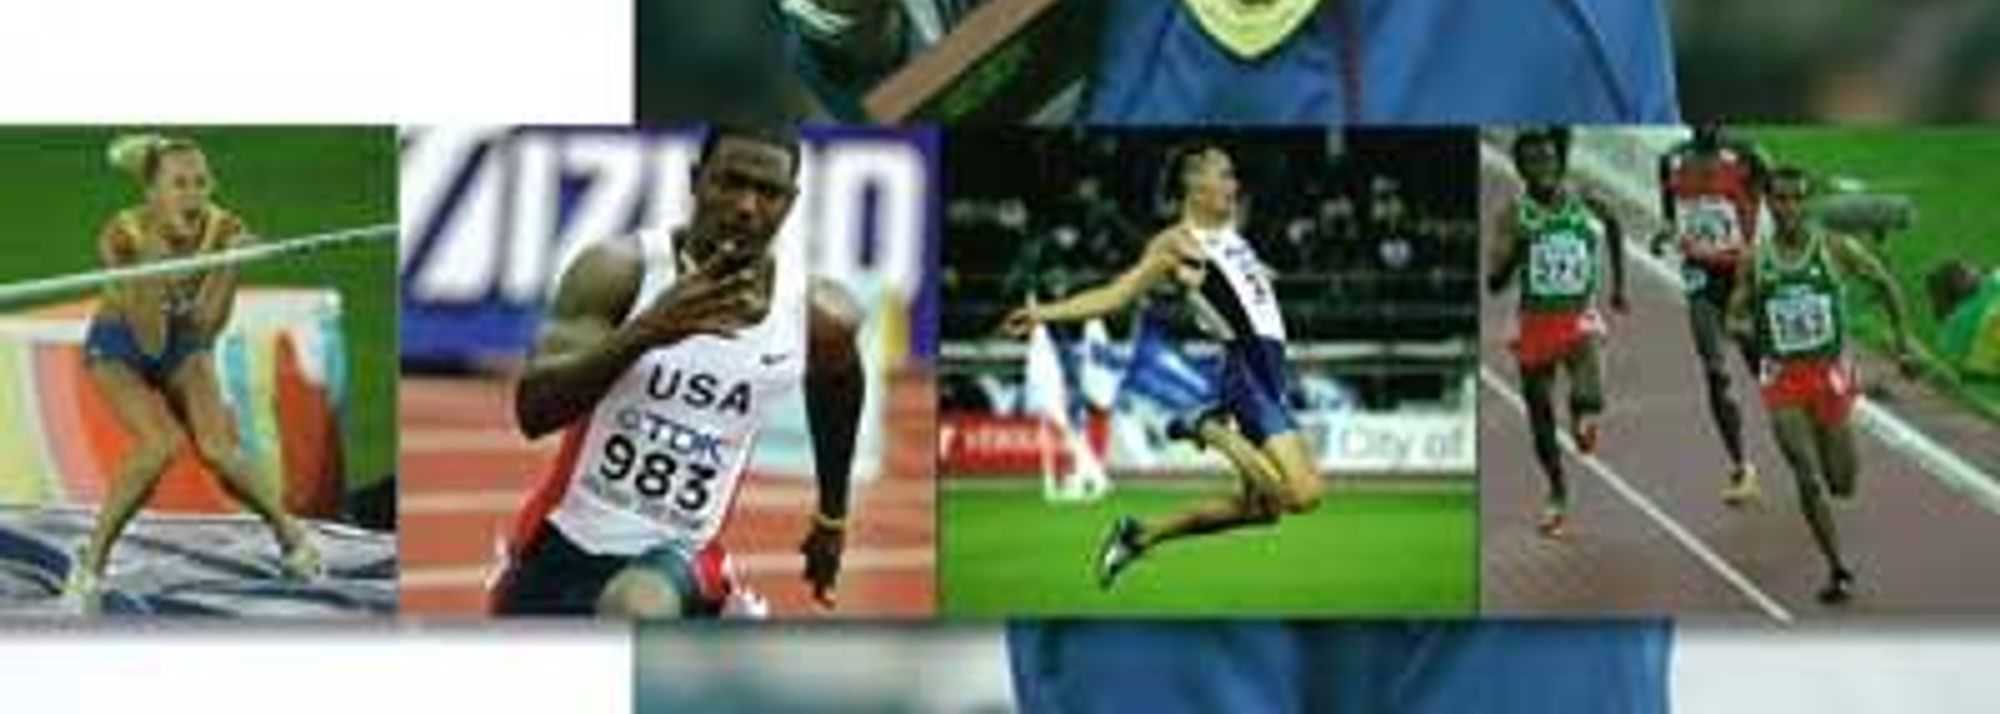 The ‘Helsinki 2005’ Official Commemorative Book of the 10th IAAF World Championships in Athletics, Helsinki, Finland, 6-14 August 2005 has been published and is now on sale.